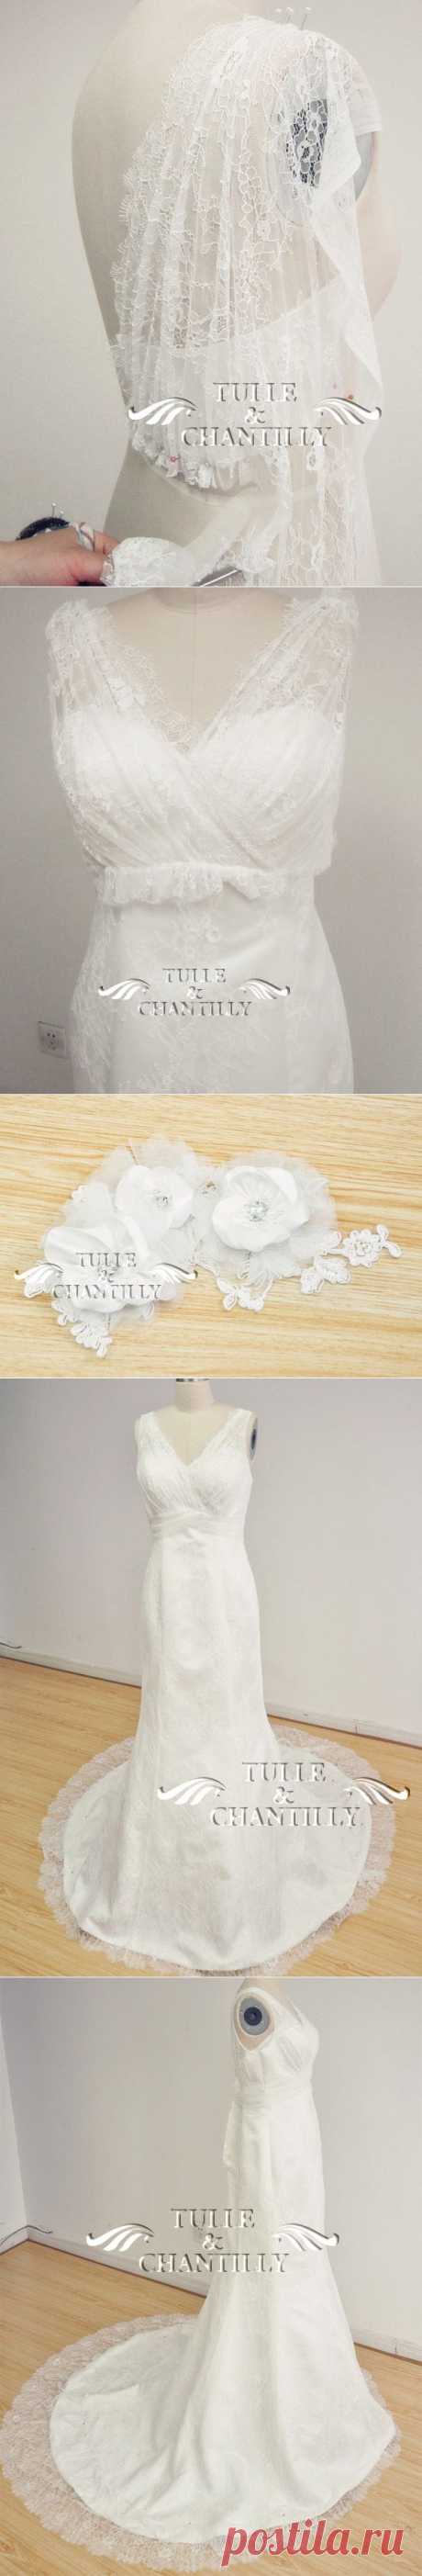 {Process Show Time} Vintage Sheer V-Neck Rustic Wedding Dress with Chantilly Lace Overlay | TulleandChantilly.com